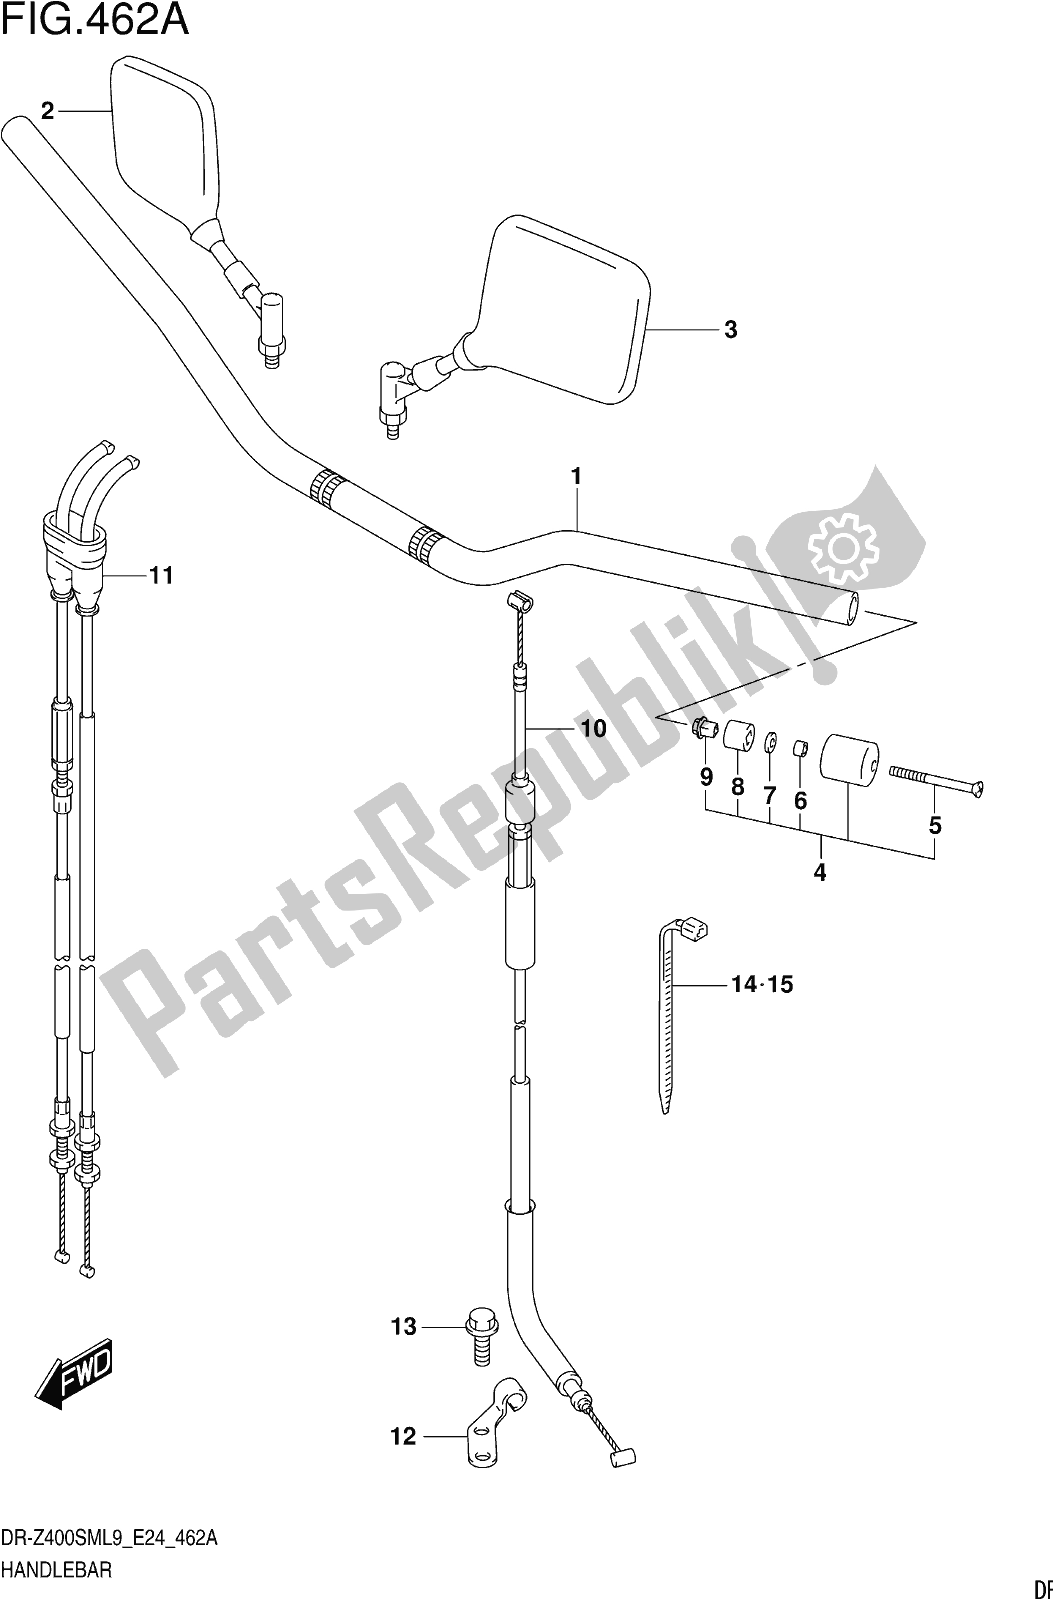 All parts for the Fig. 462a Handlebar of the Suzuki DR-Z 400 SM 2019